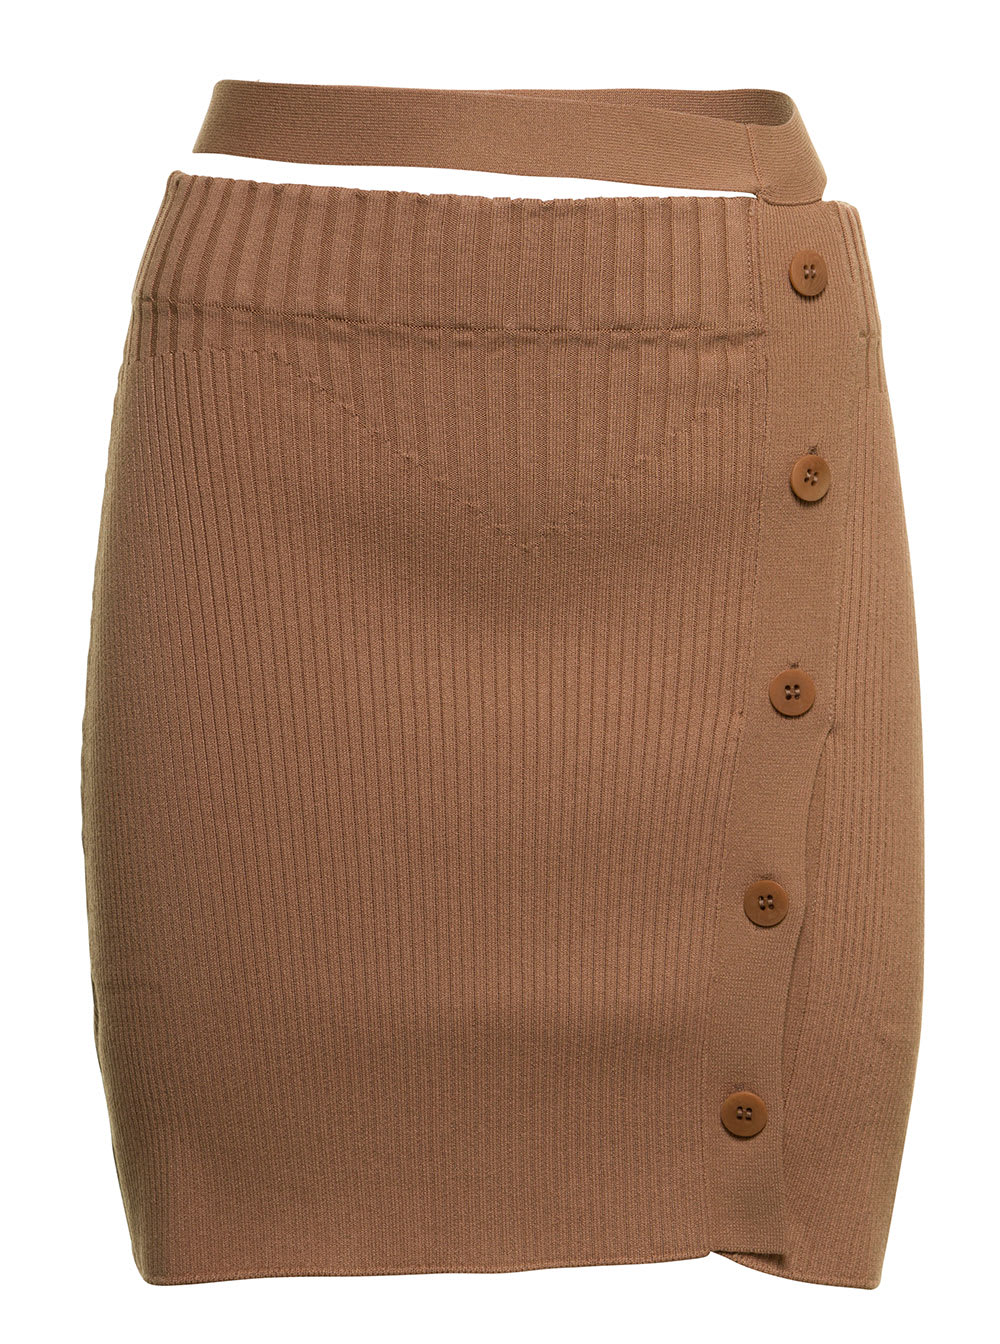 ANDREADAMO Andrea Adamo Woman Beige Viscose Skirt With Cut Out Detail